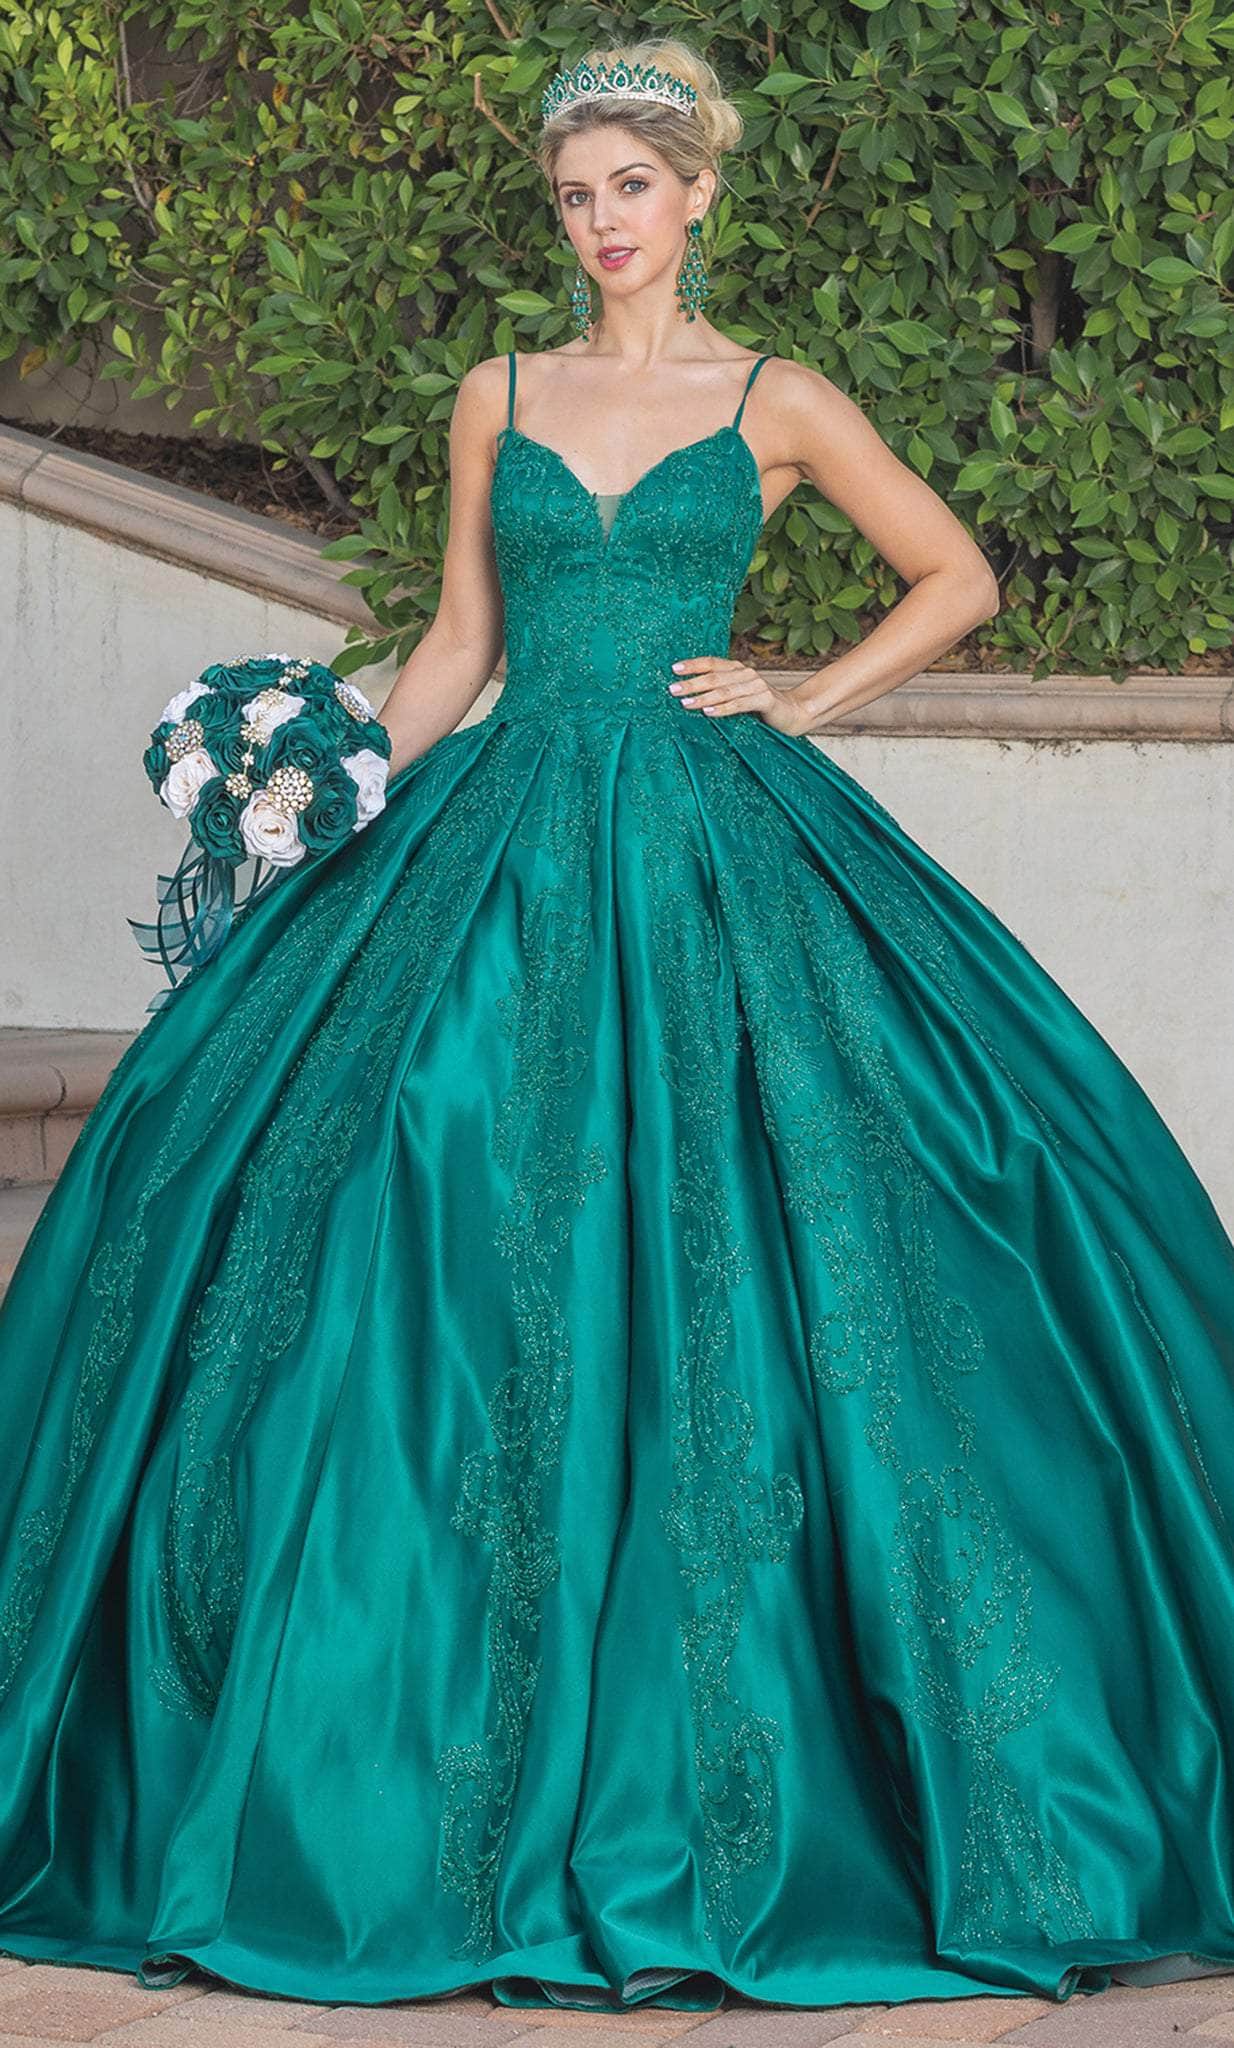 Image of Dancing Queen 1756 - Embellished V-Neck Pleated Ballgown